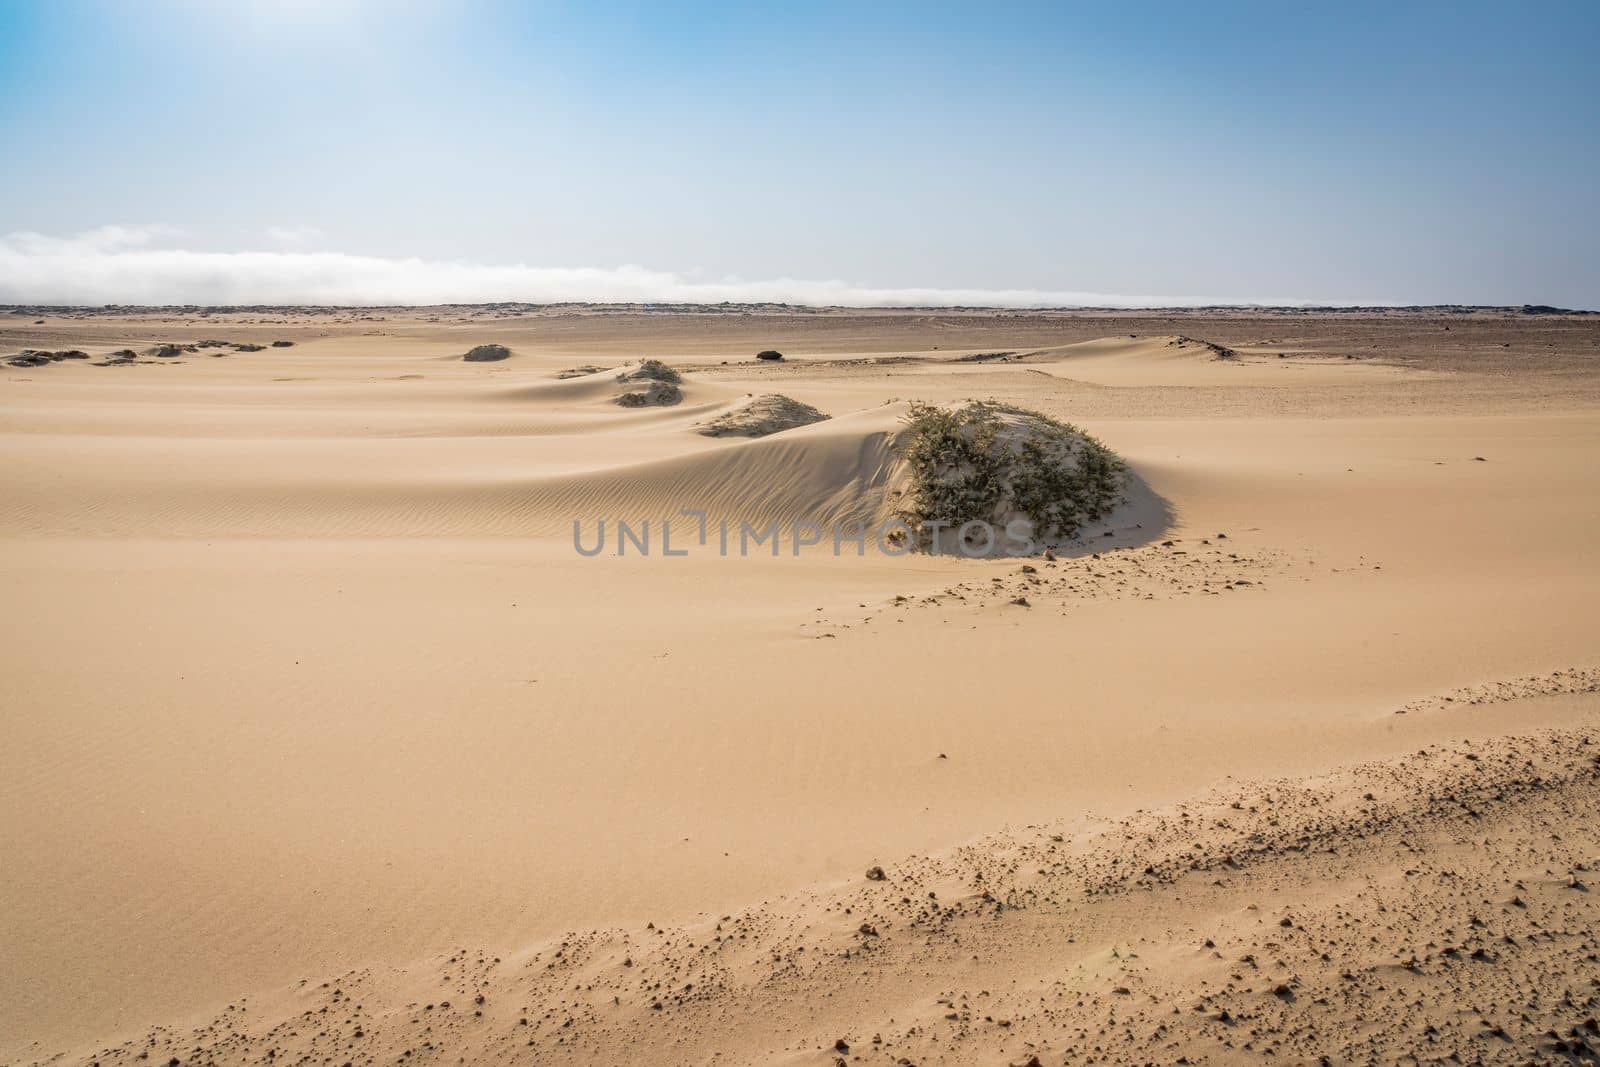 view of the Skeleton Coast desert dunes in Namibia in Africa.